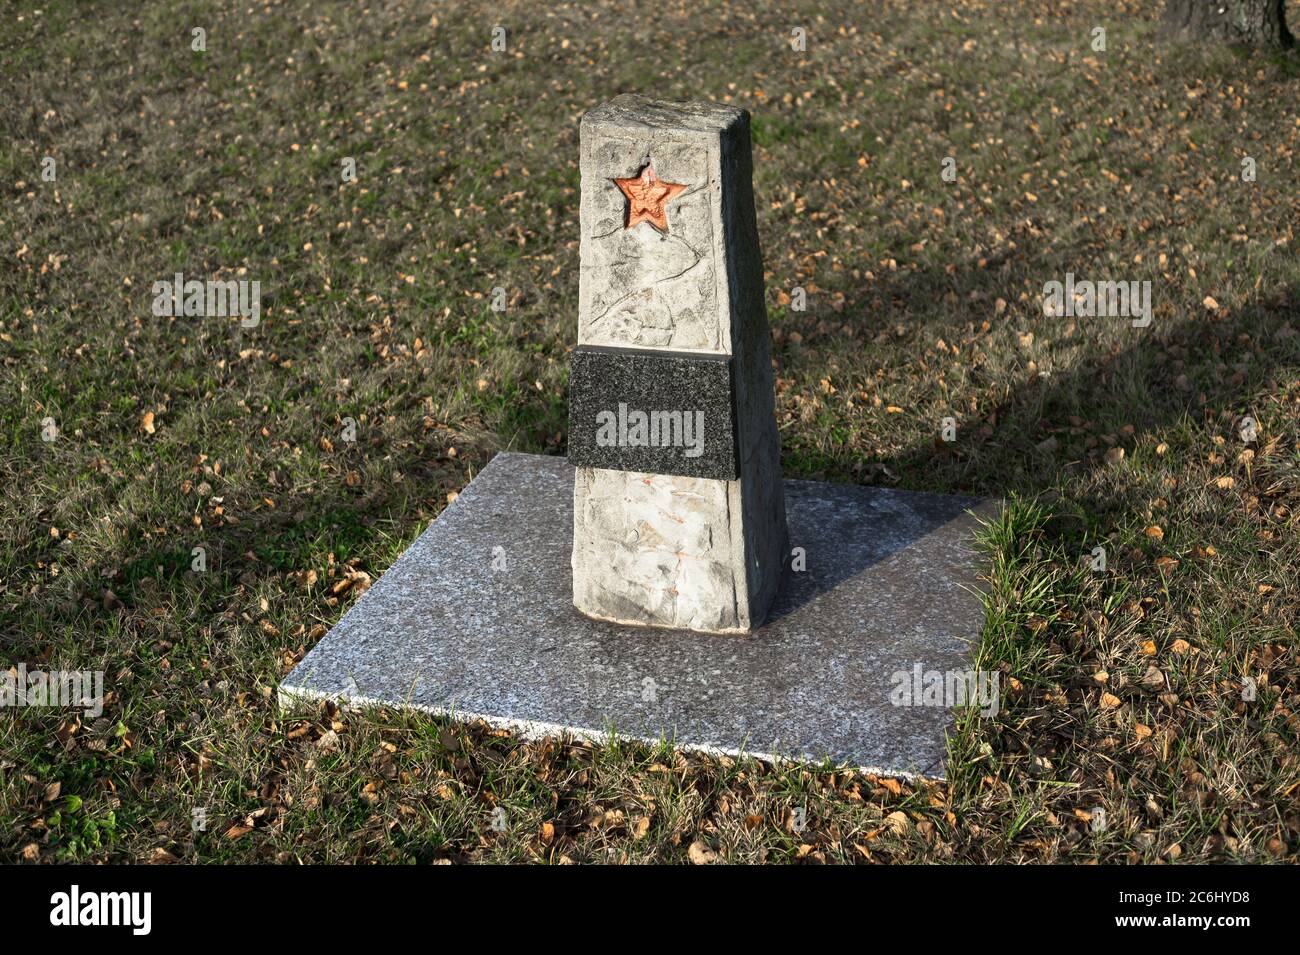 Memorial and grave of unknown soviet soldier from red army. Gravestone with red star. Grass and leaves around place Stock Photo